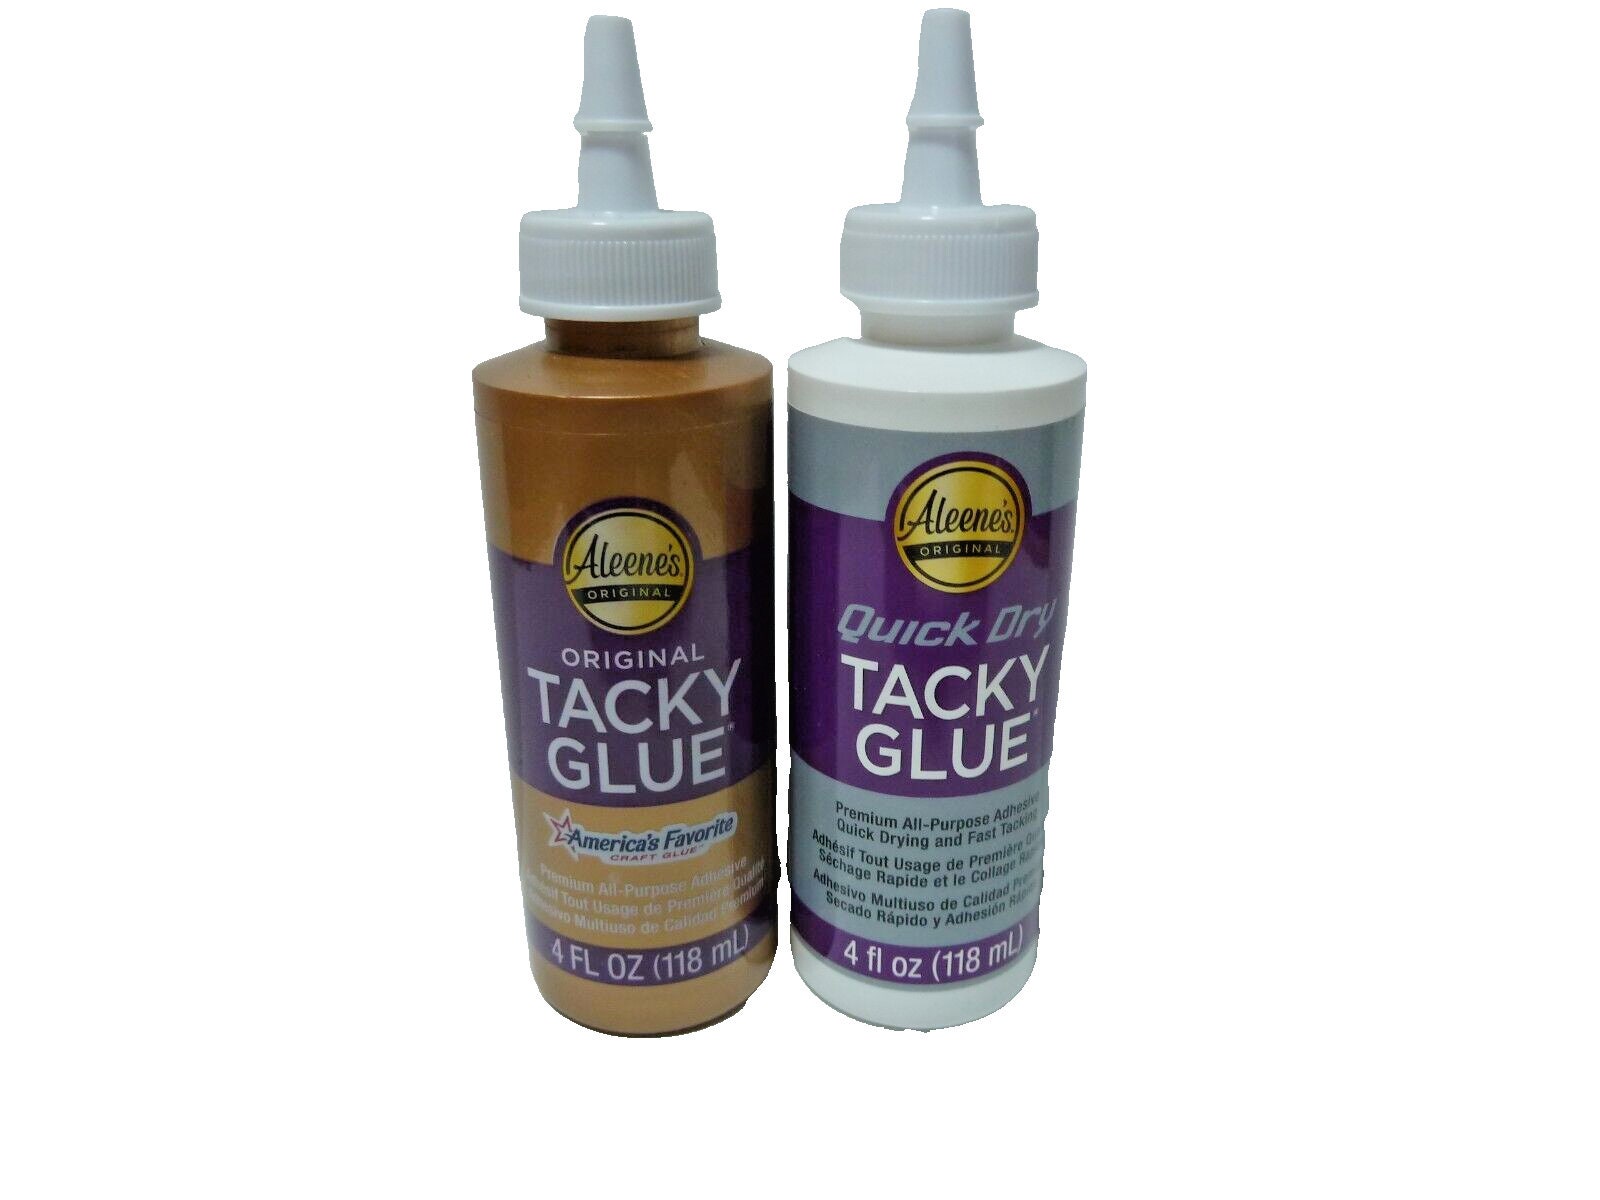 Aleene's Original Tacky Glue .66 FL OZ for Wooden Paddle Assembly